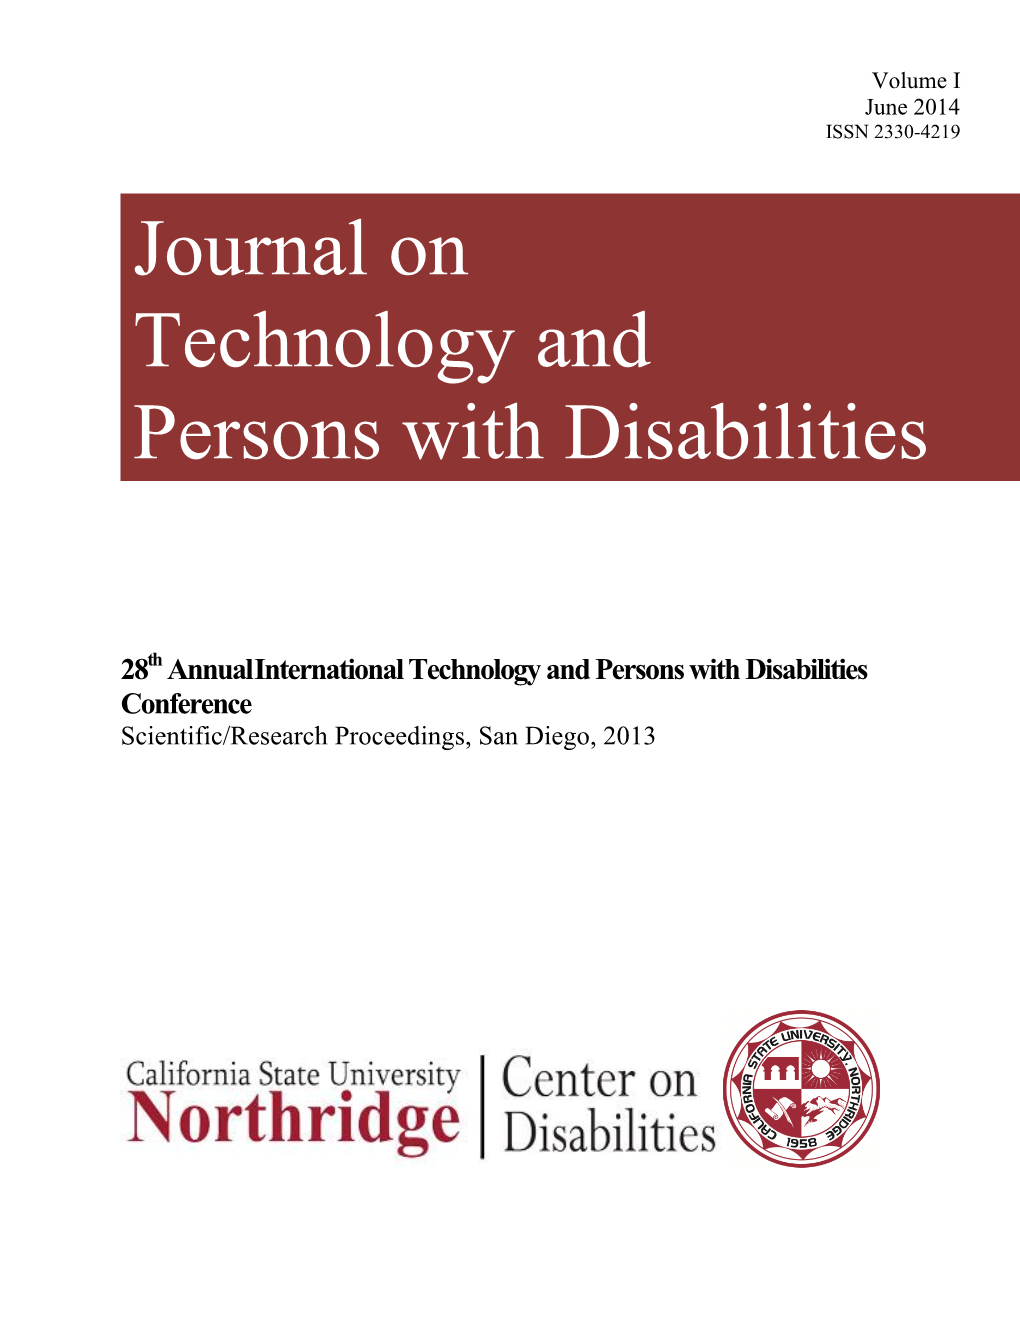 Journal on Technology and Persons with Disabilities, Issue 1